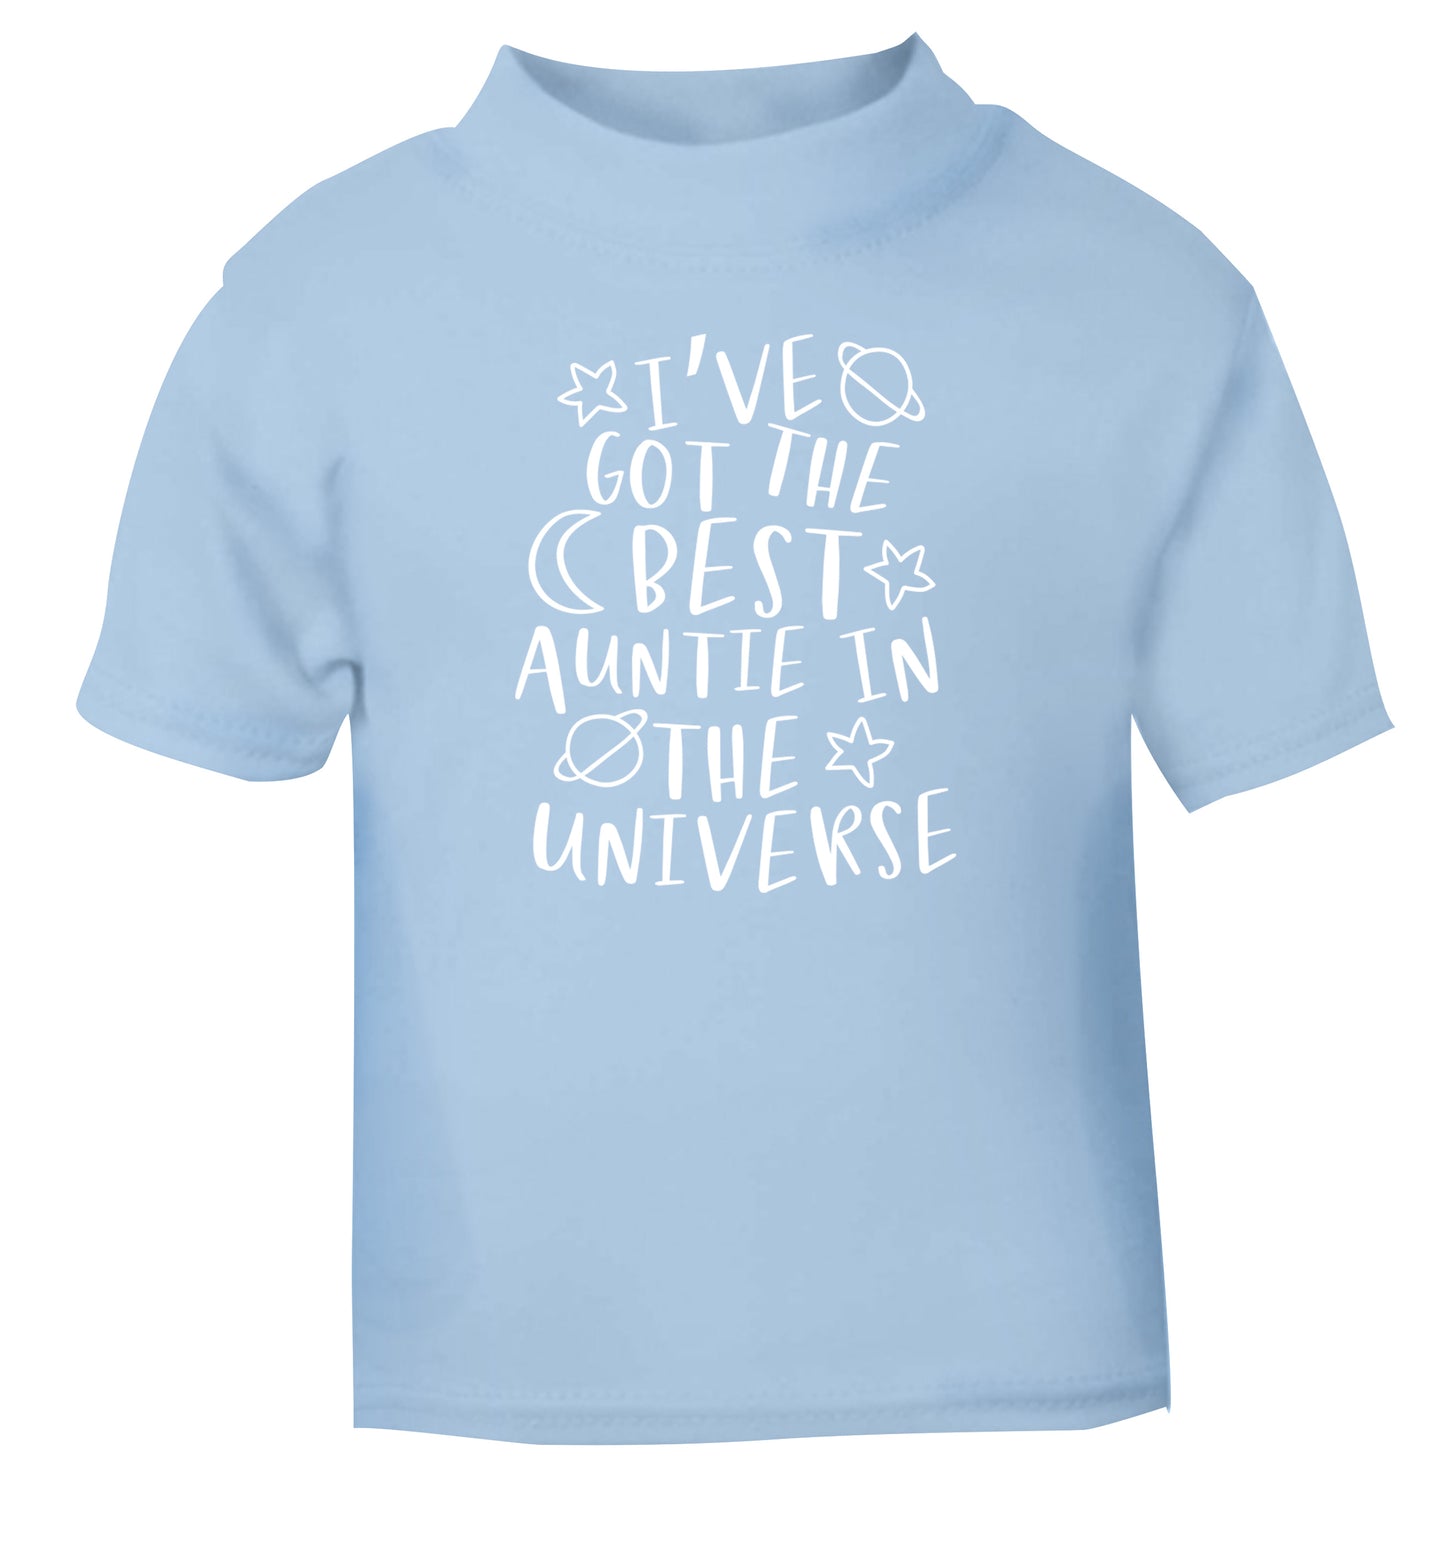 I've got the best auntie in the universe light blue Baby Toddler Tshirt 2 Years